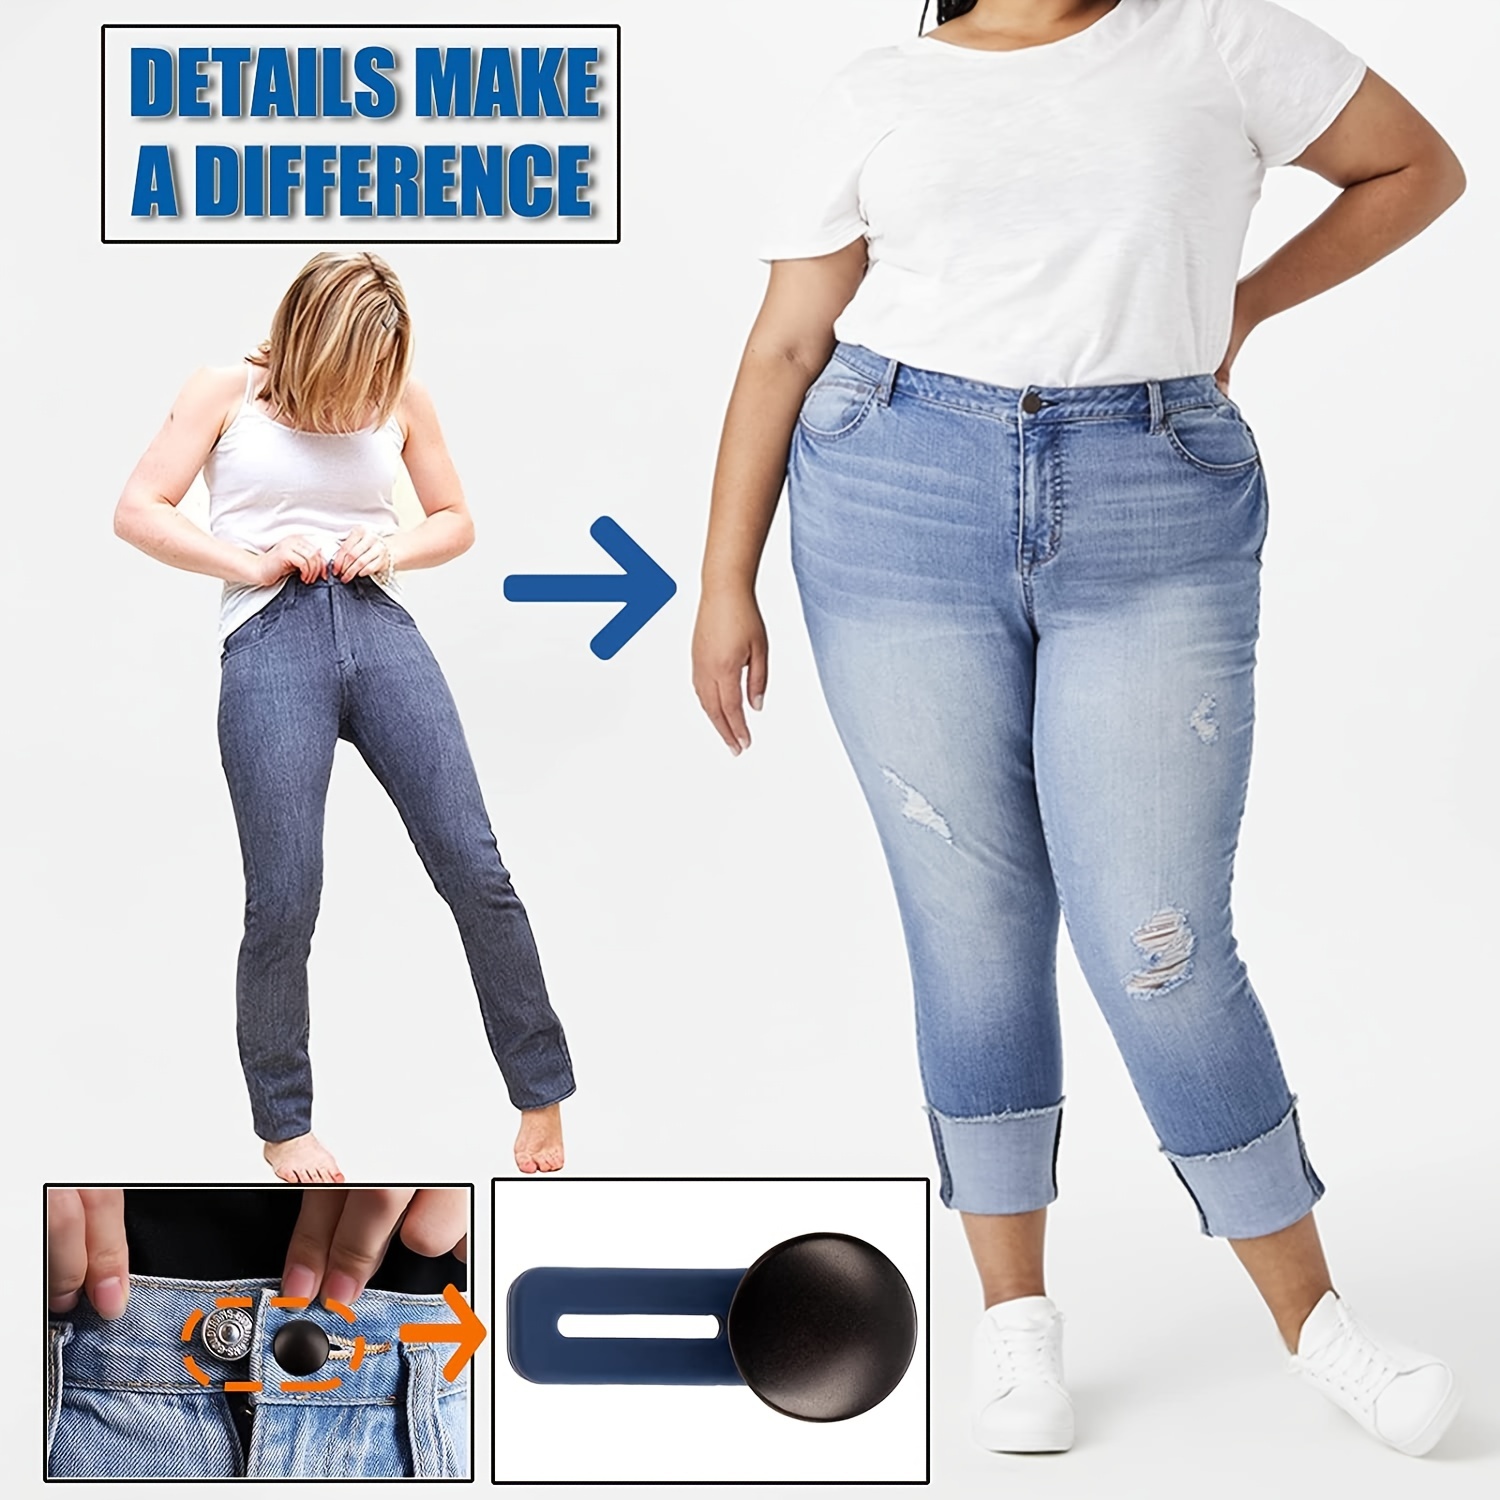 Adjustable Metal Stud Button Extender For Pants And Jeans Free Sewing,  Retractable Waistband Expander From Moomoo2016, $0.66